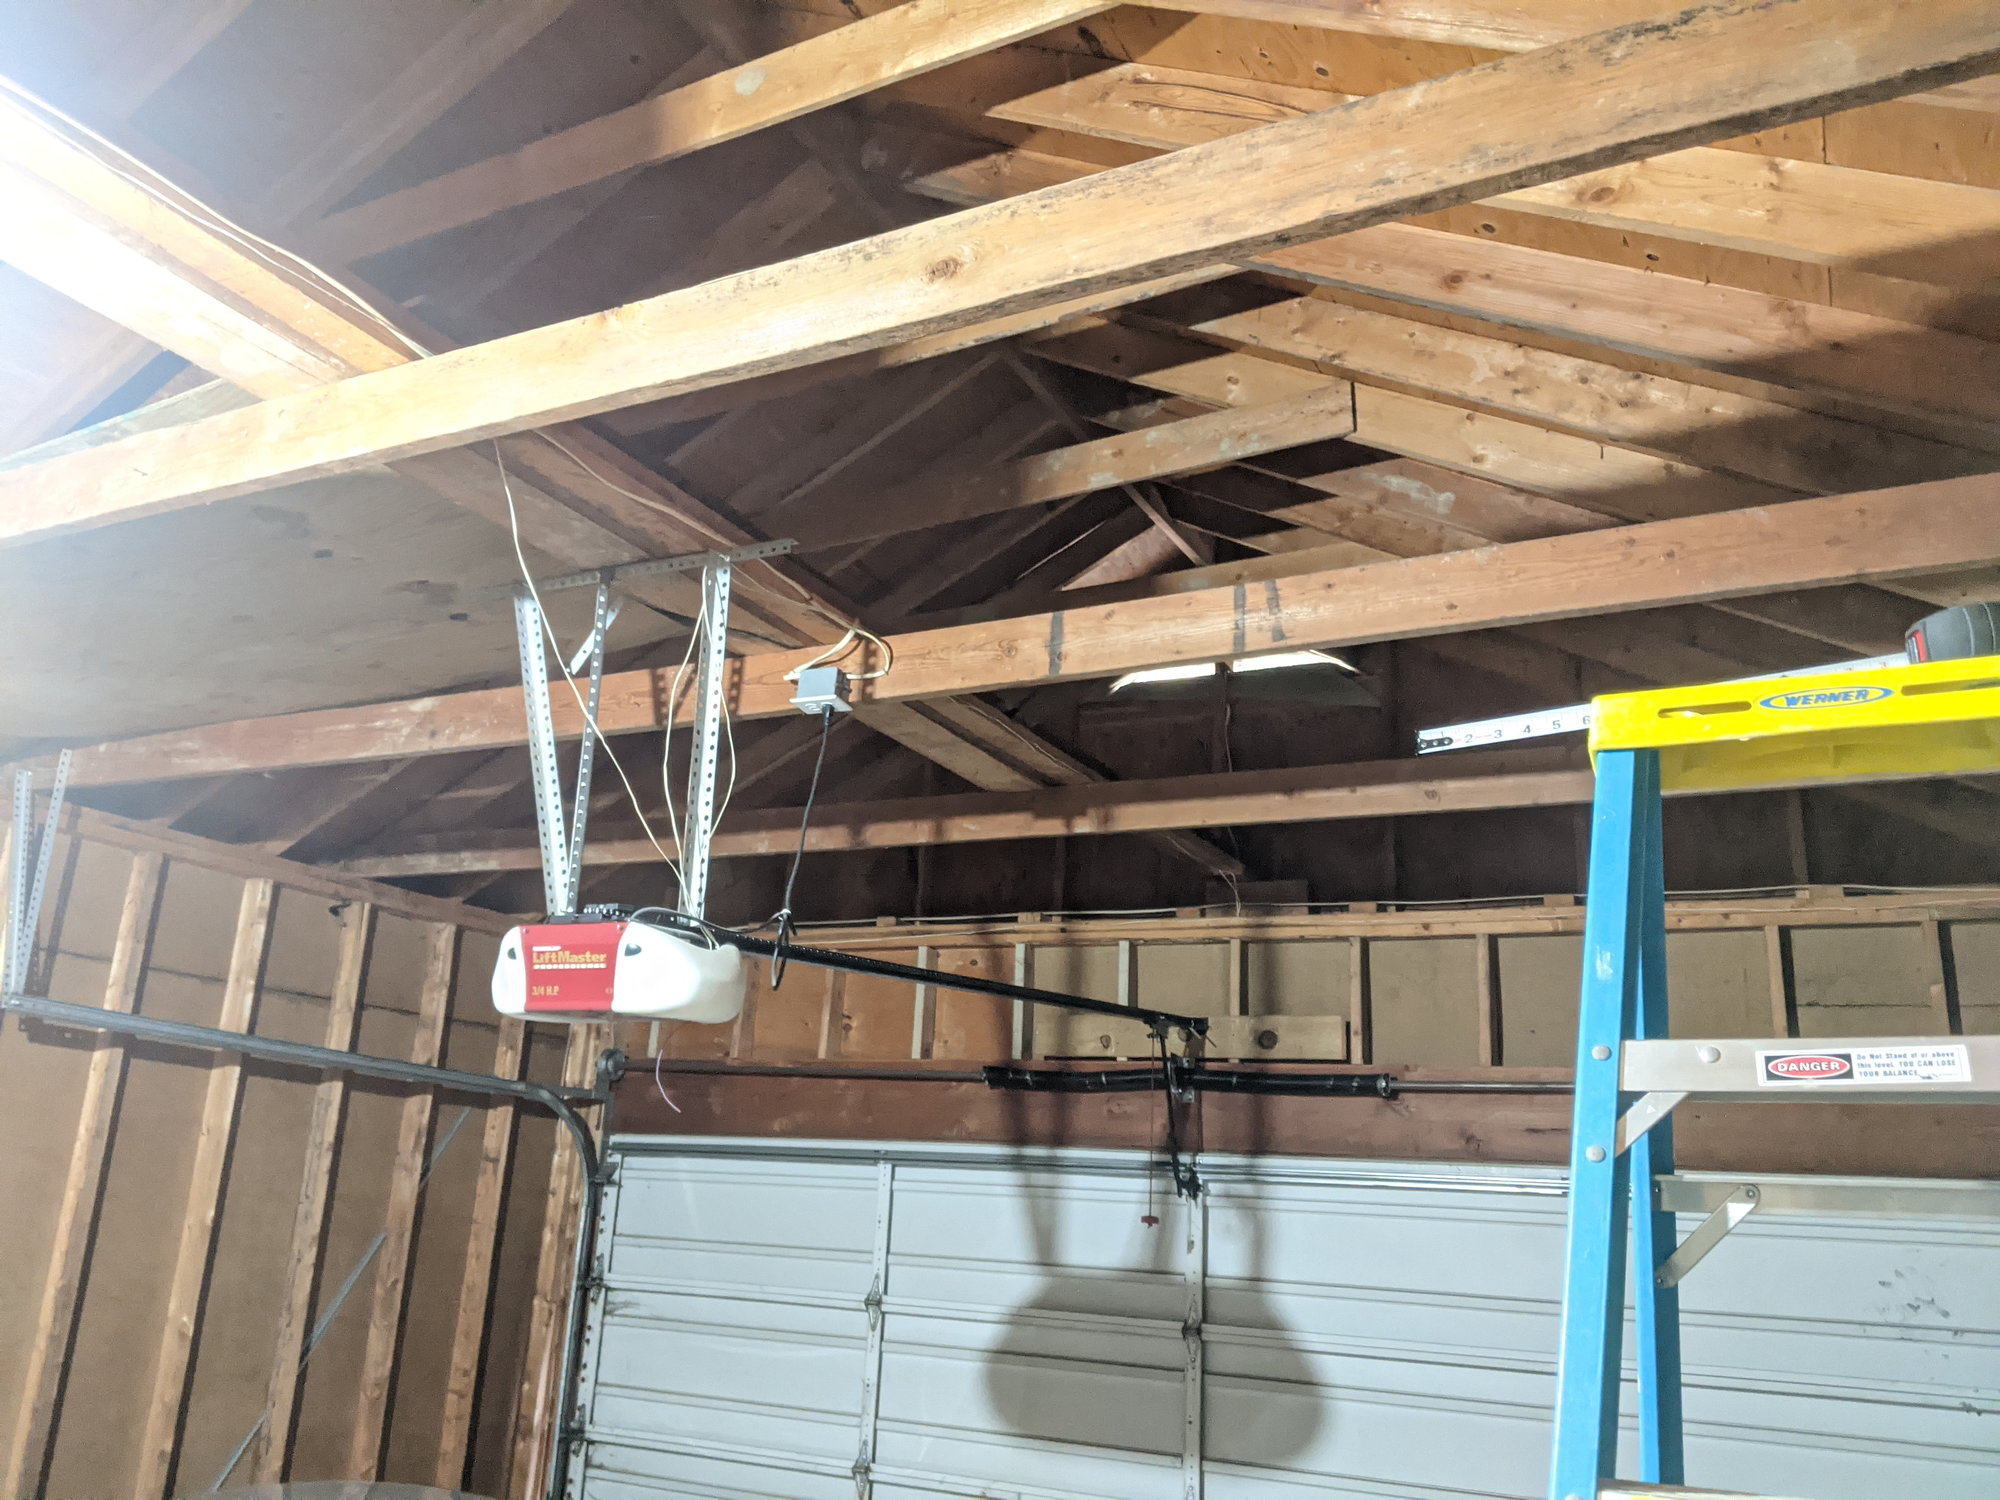 Garage Insulation Advice For A Newb, How To Insulate A Finished Garage Ceiling